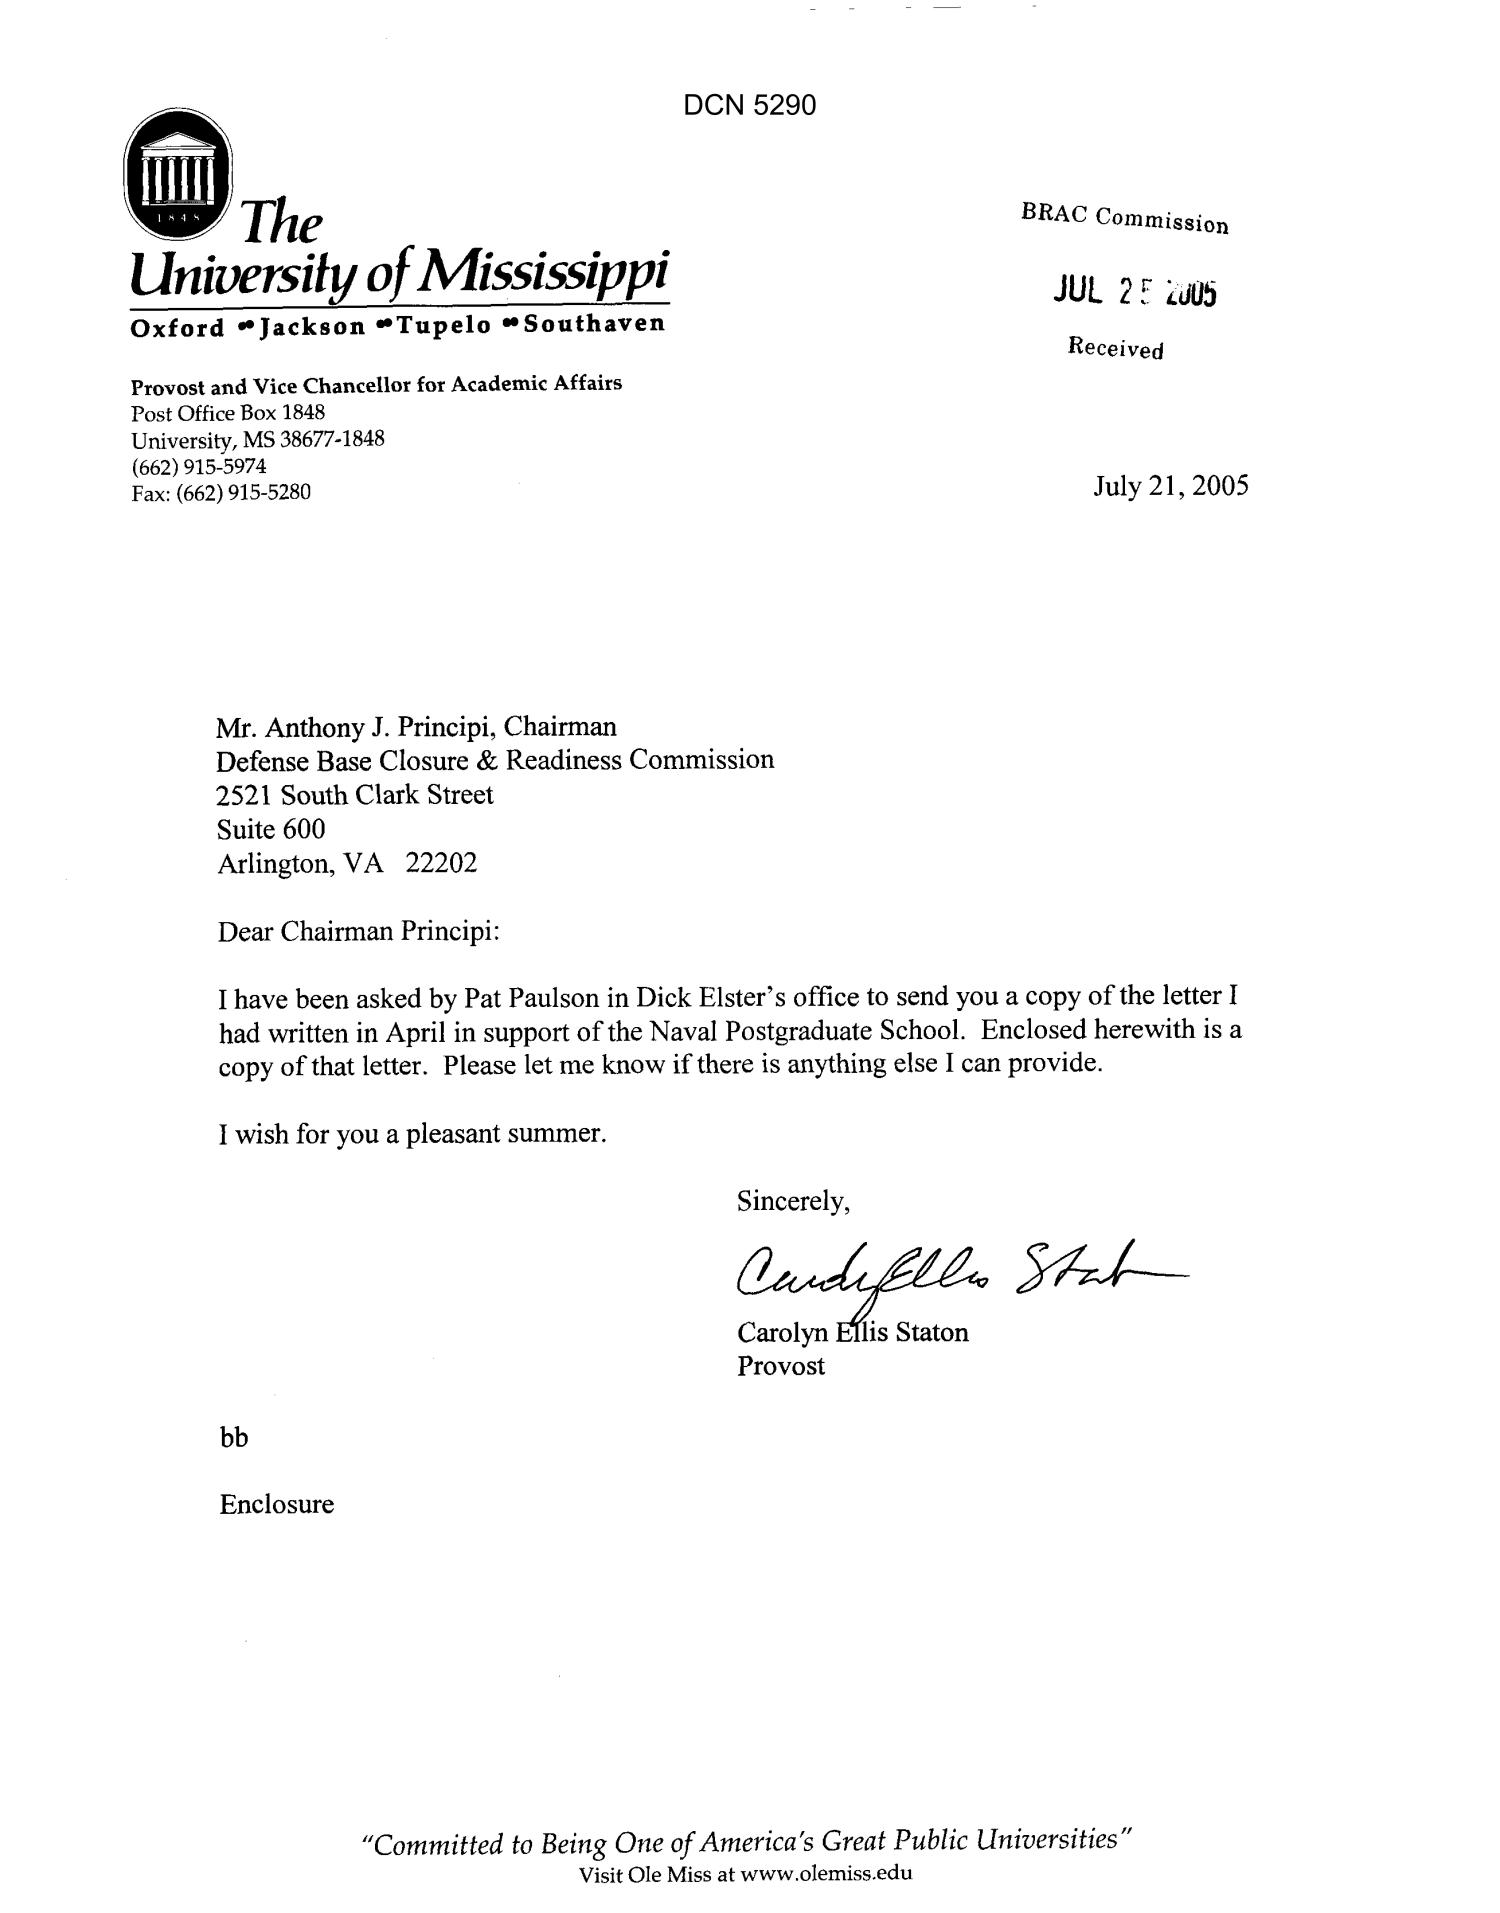 Executive Correspondence - Letter from Carolyn Ellis ...